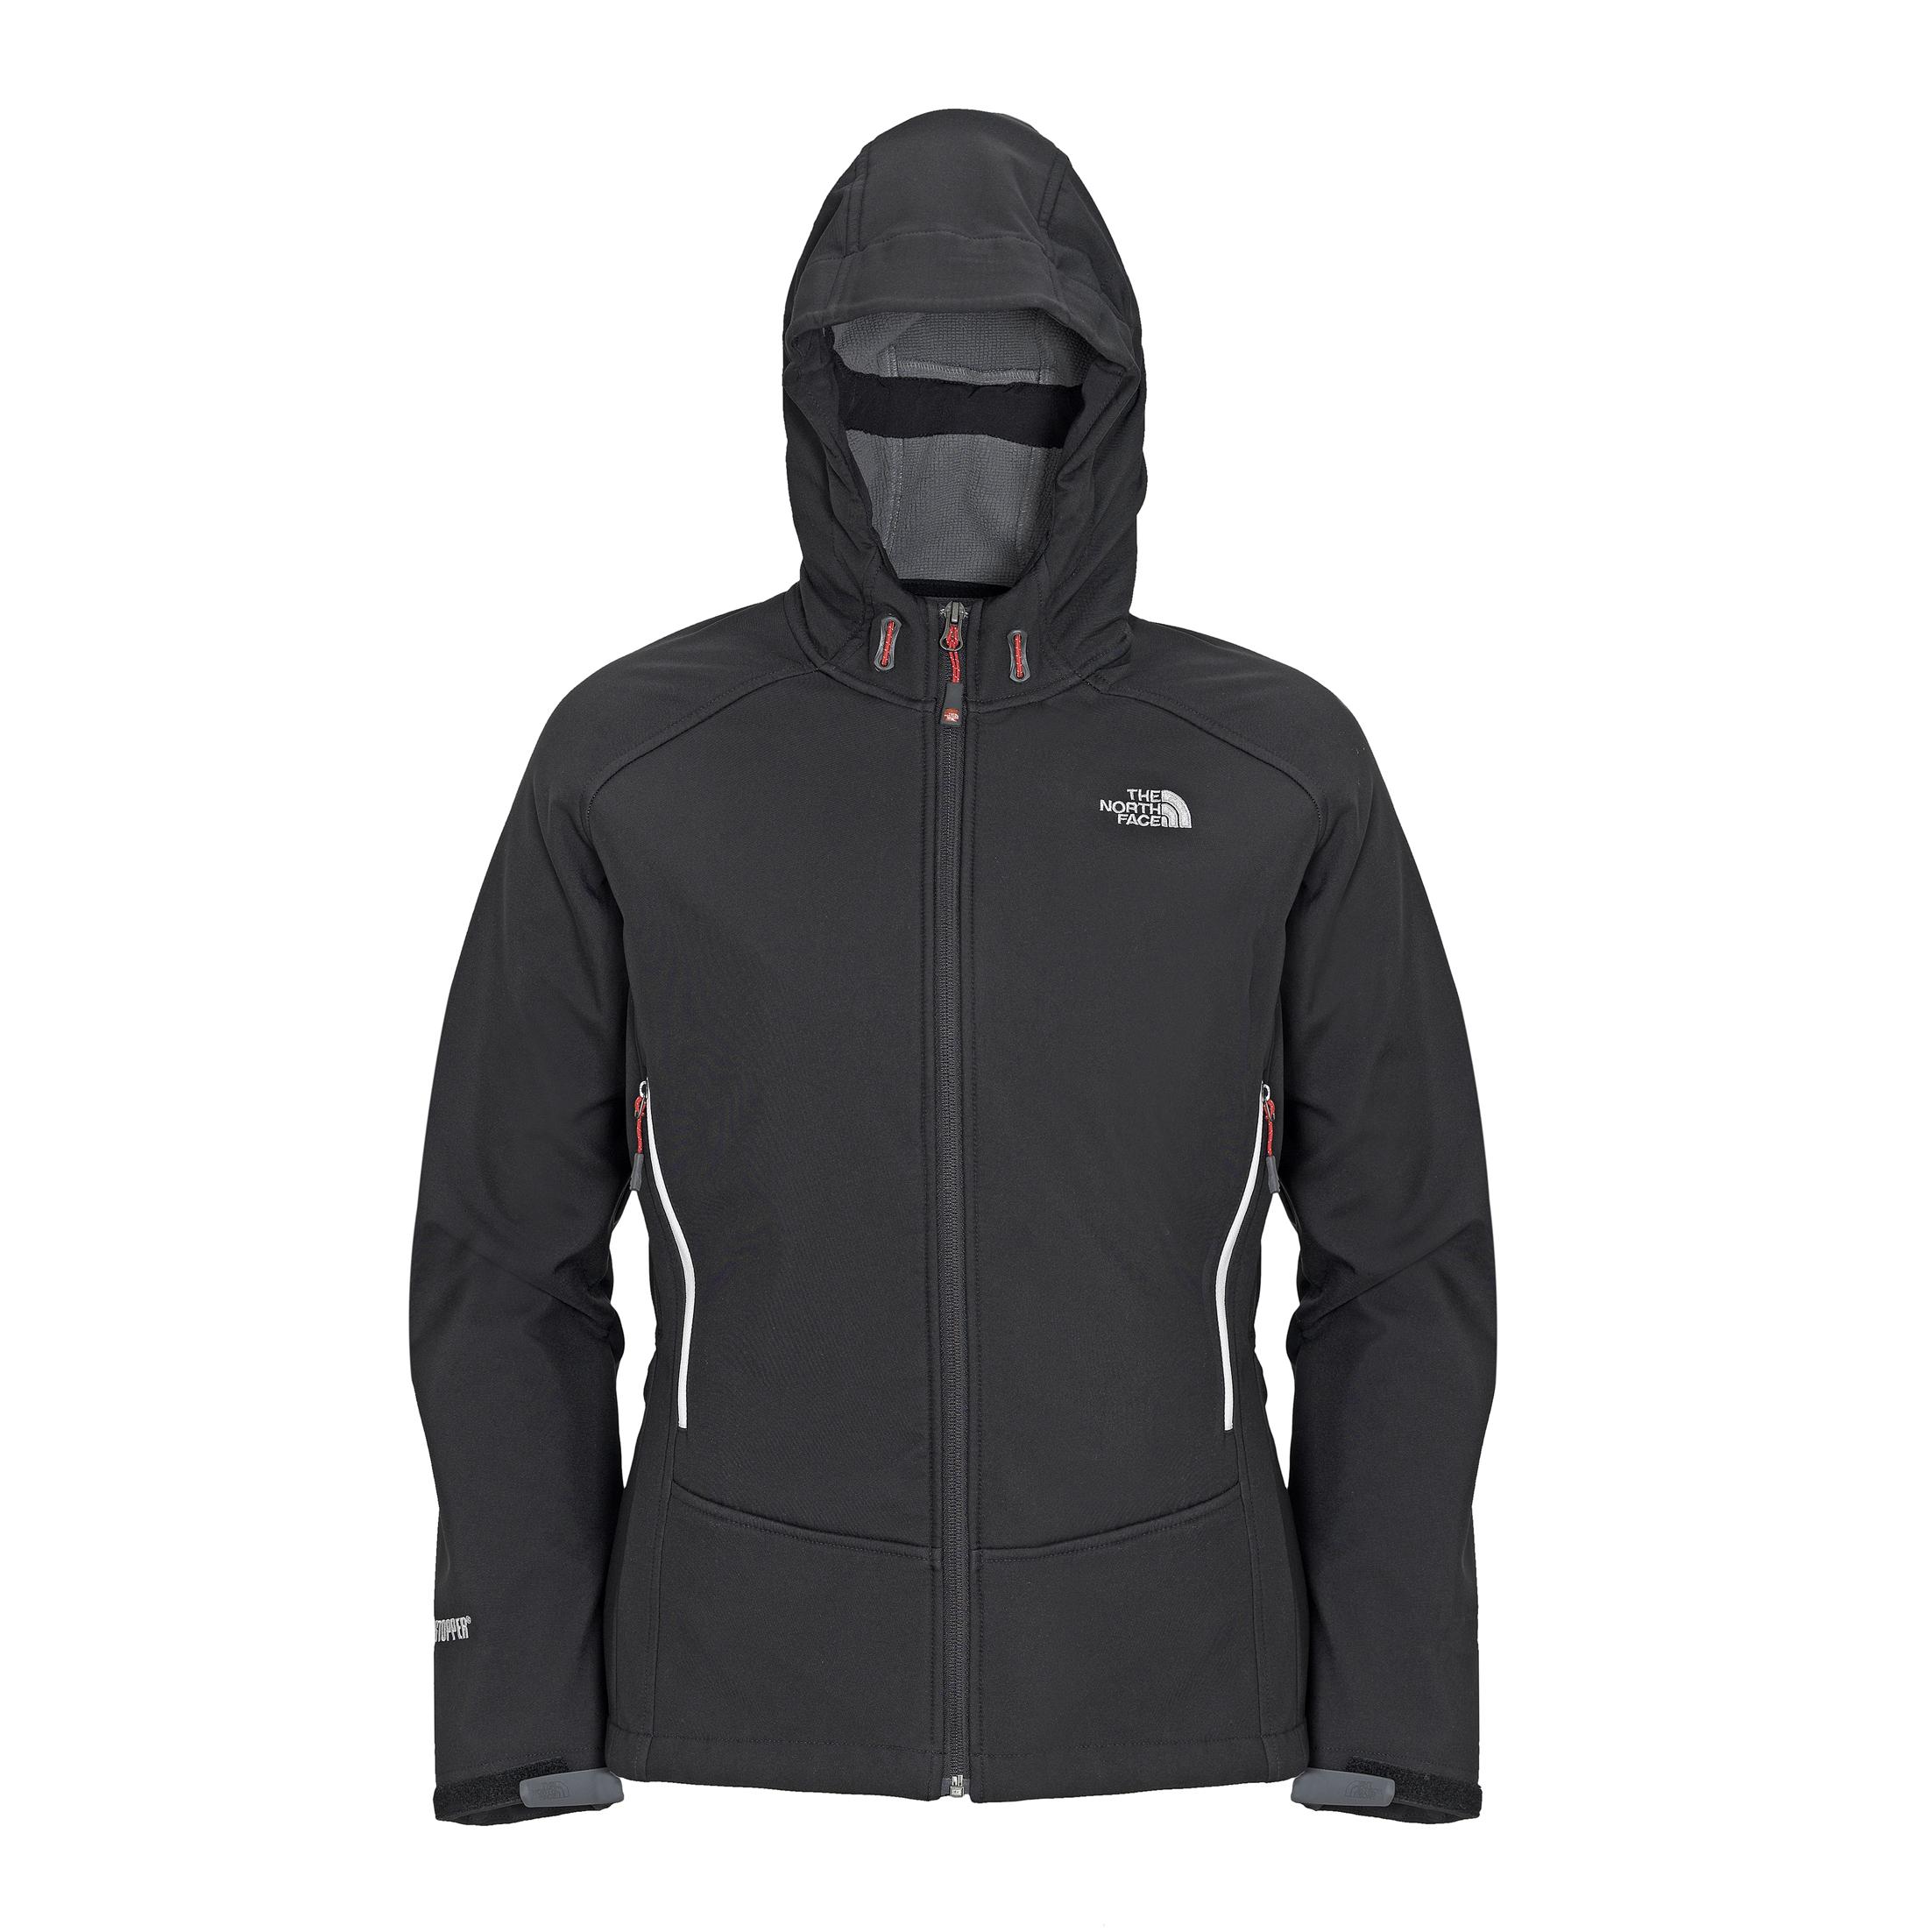 Foto The north face W valkyrie jacket